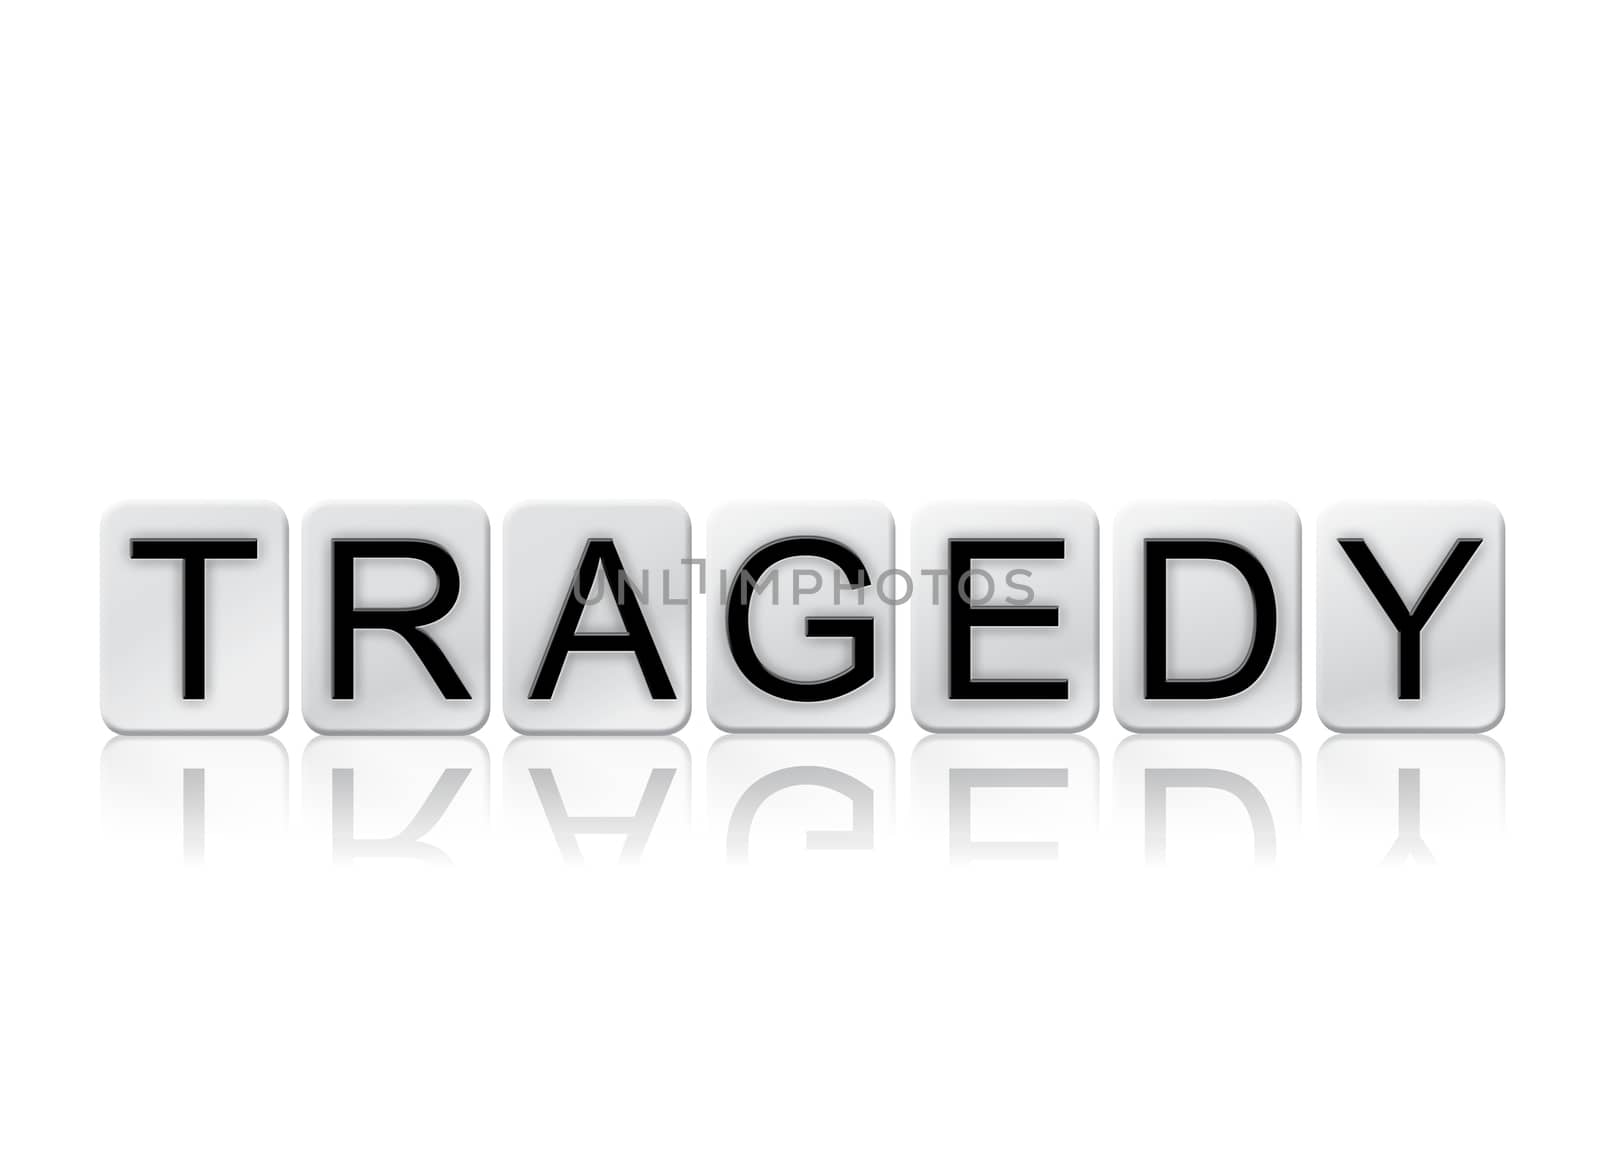 Tragedy Isolated Tiled Letters Concept and Theme by enterlinedesign